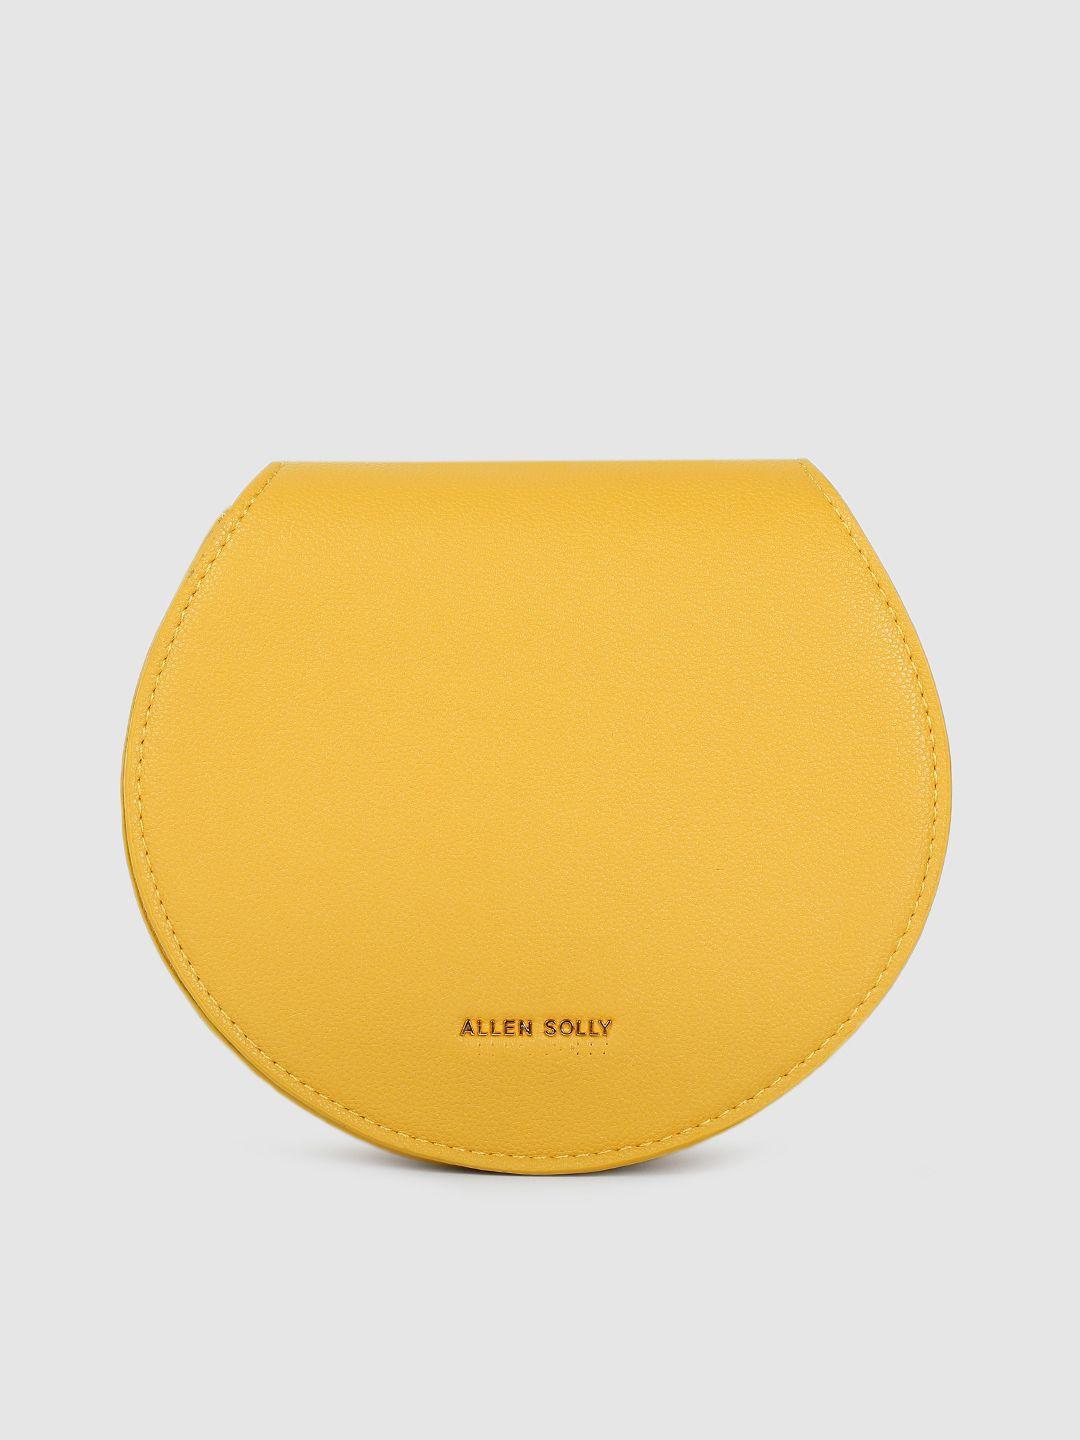 allen solly yellow solid sling bag